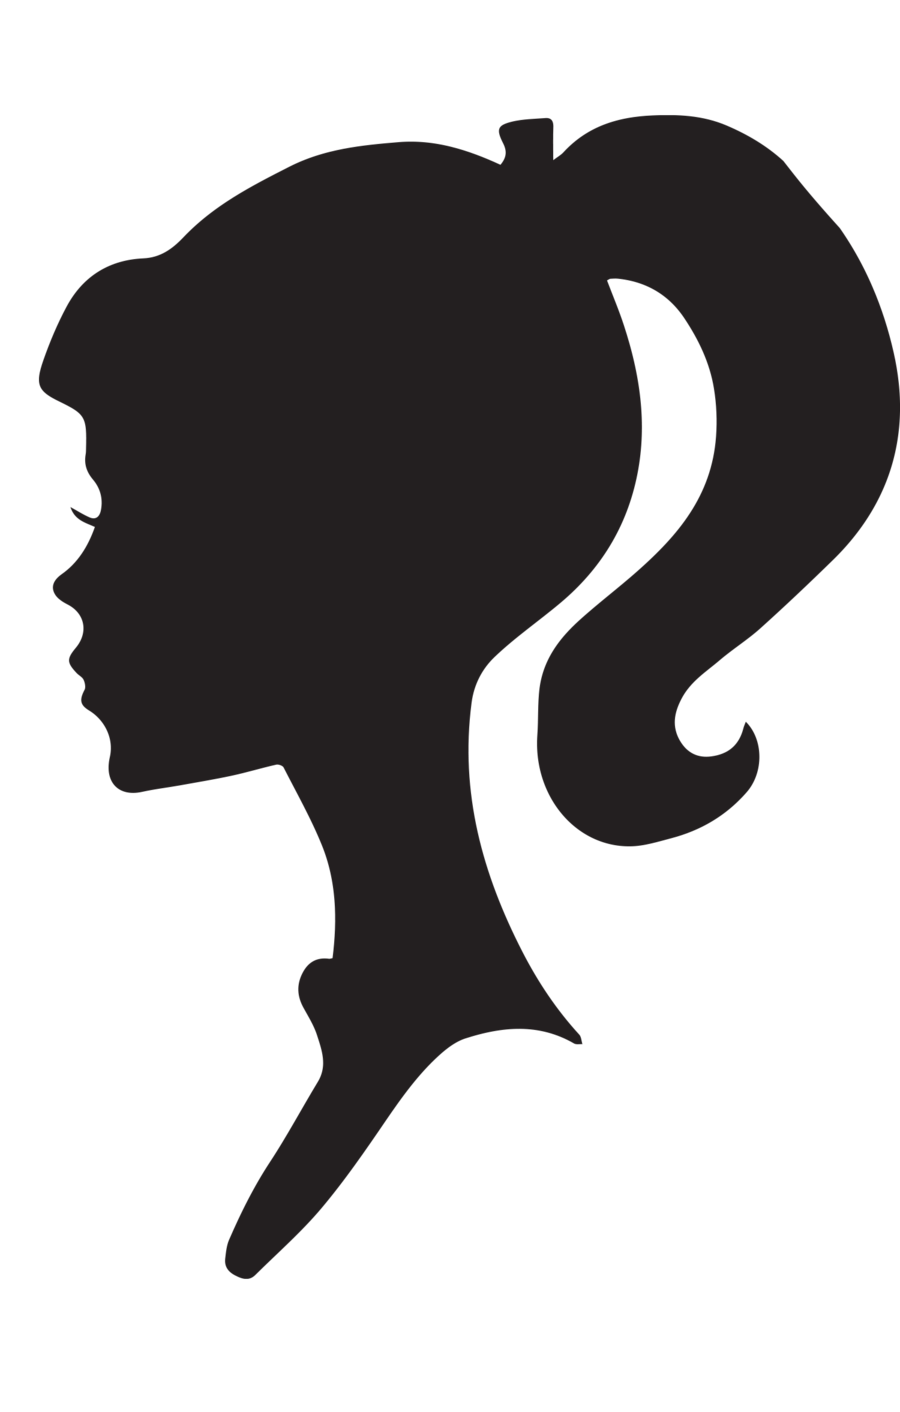 Female Silhouette Profile By Snicklefritz Stock On Deviantart